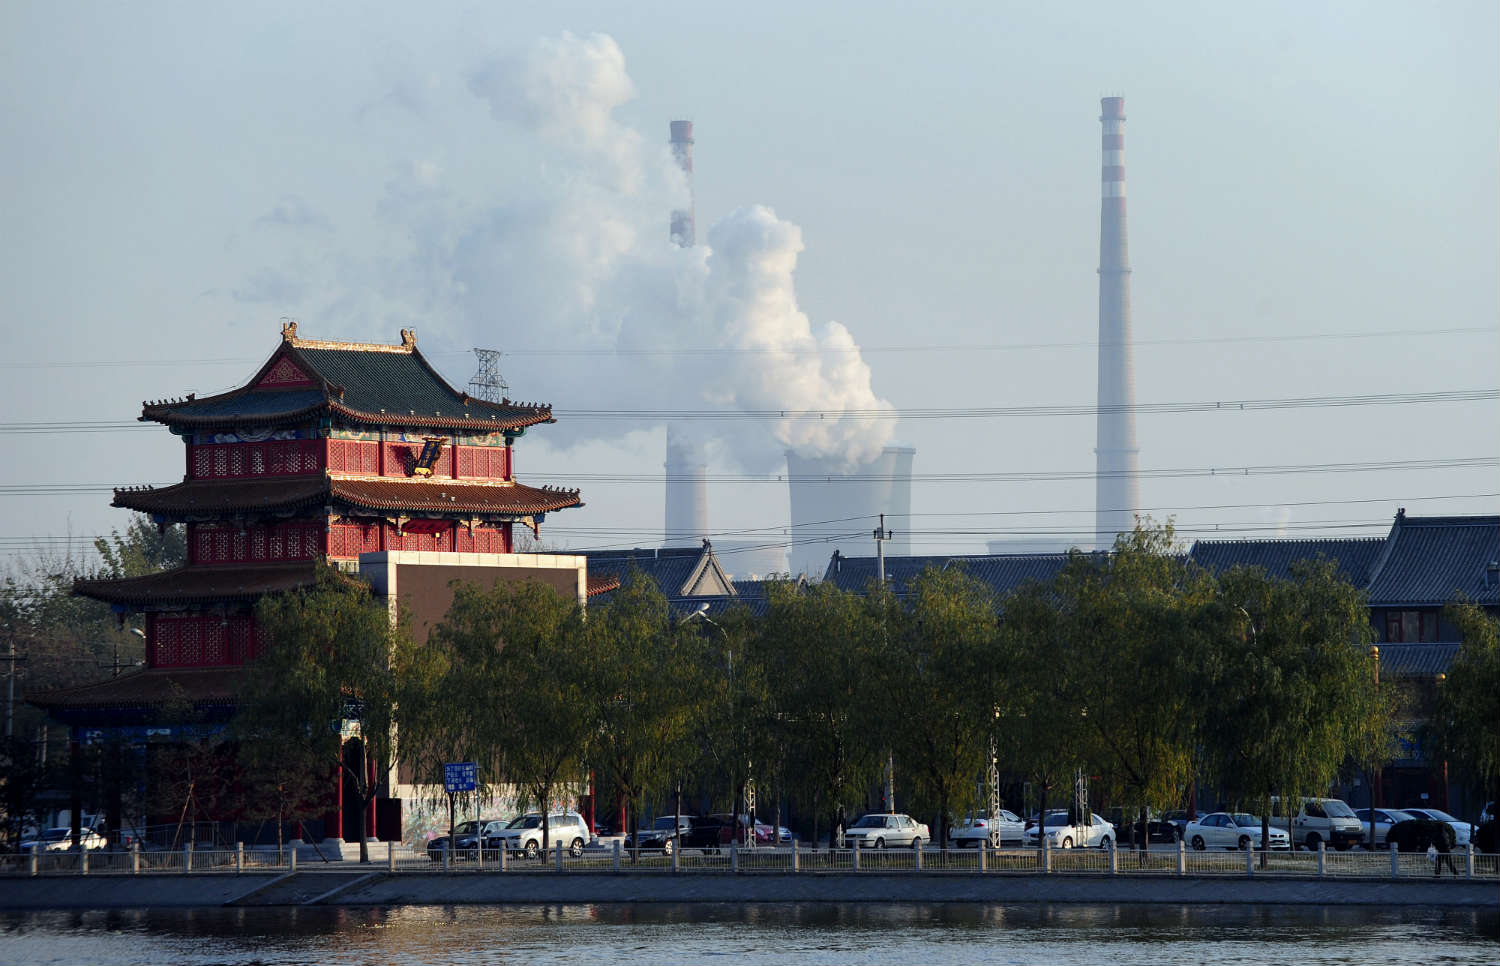 A coal plant looms behind a traditional house in Tianjin, China